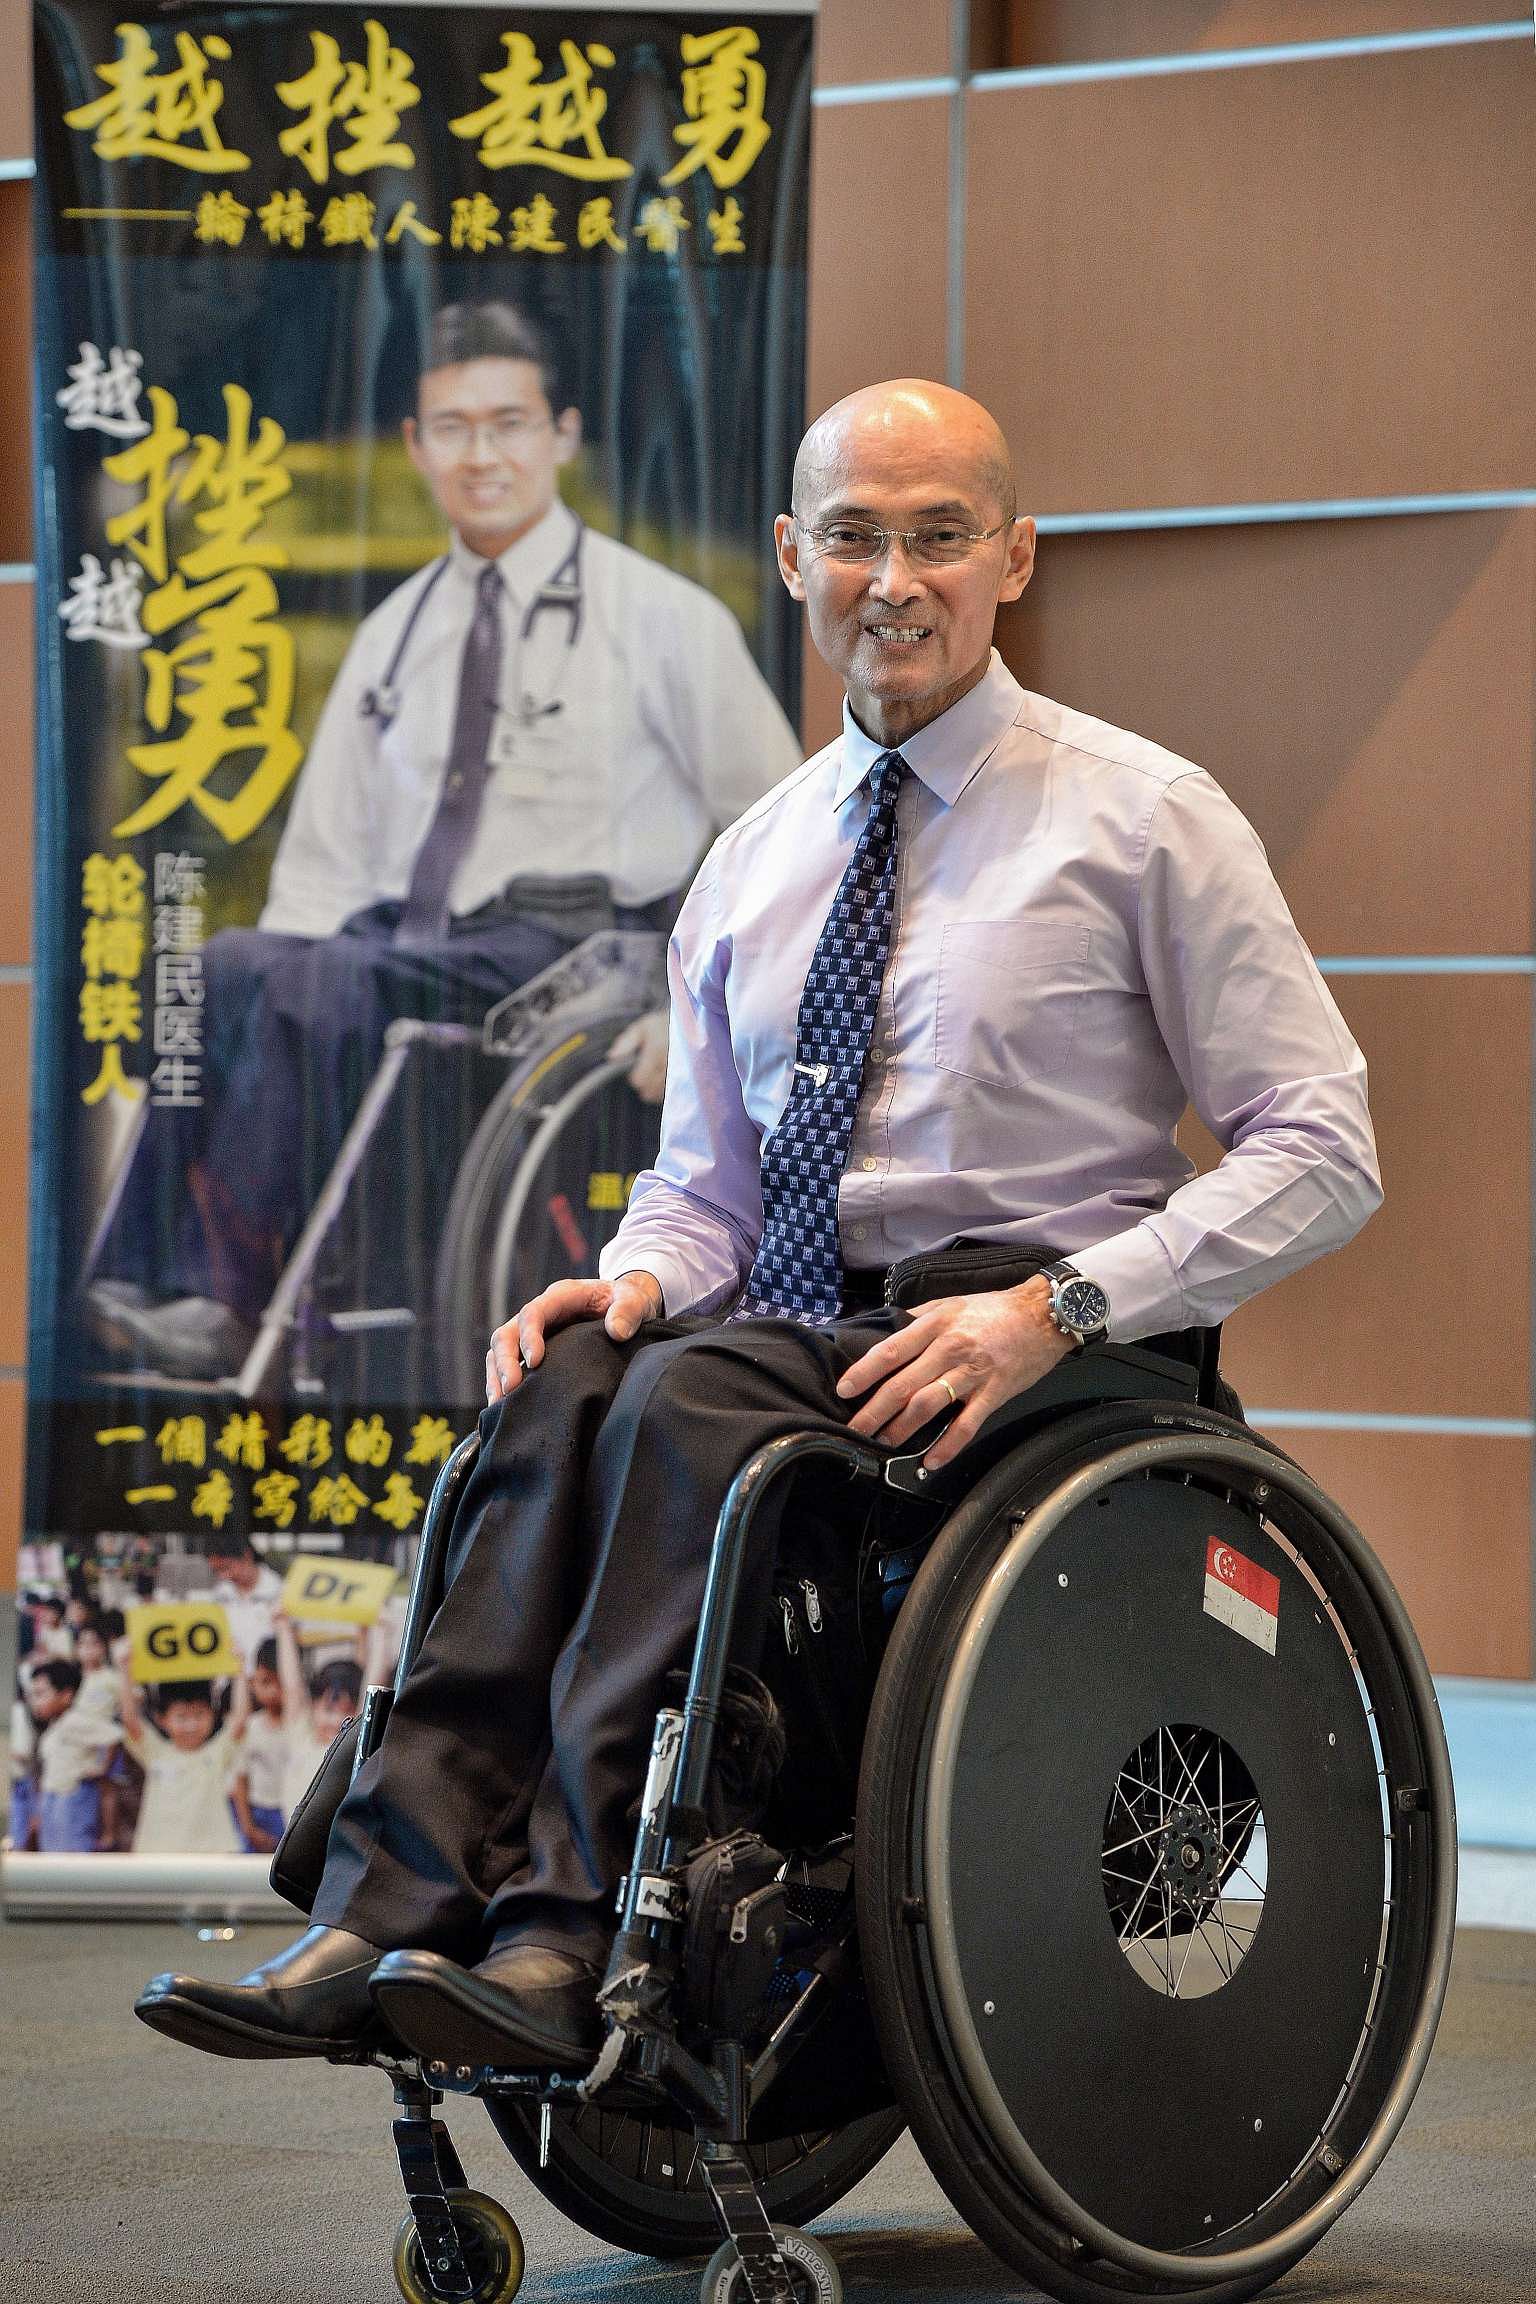 Dr Tan in front of a banner for his new Mandarin book More Challenges, More Vigour. Proceeds from the sales will go to charity.